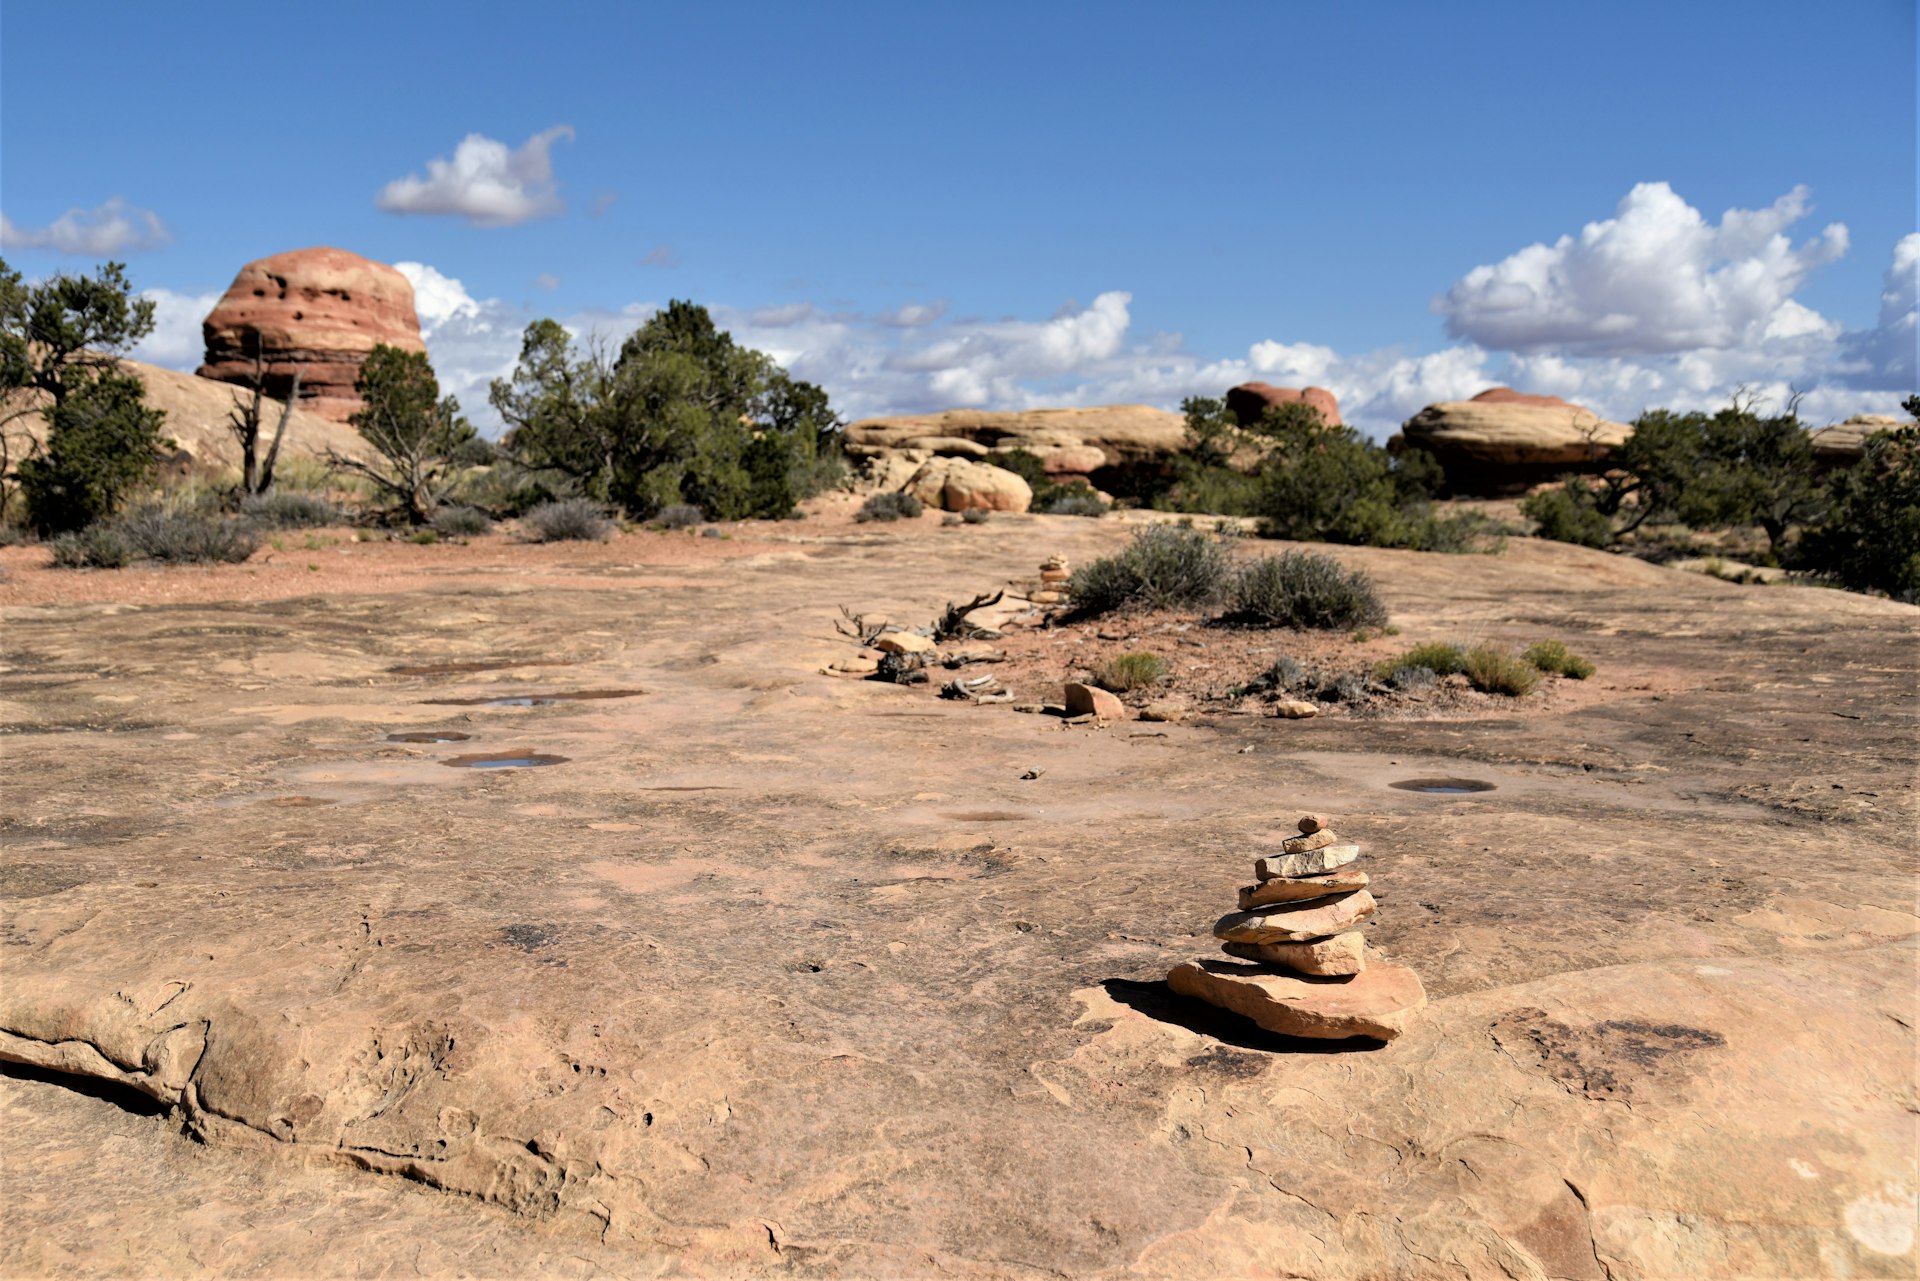 Cairns mark the trail from Elephant Hill to Chesler Park in Canyonlands National Park, Utah